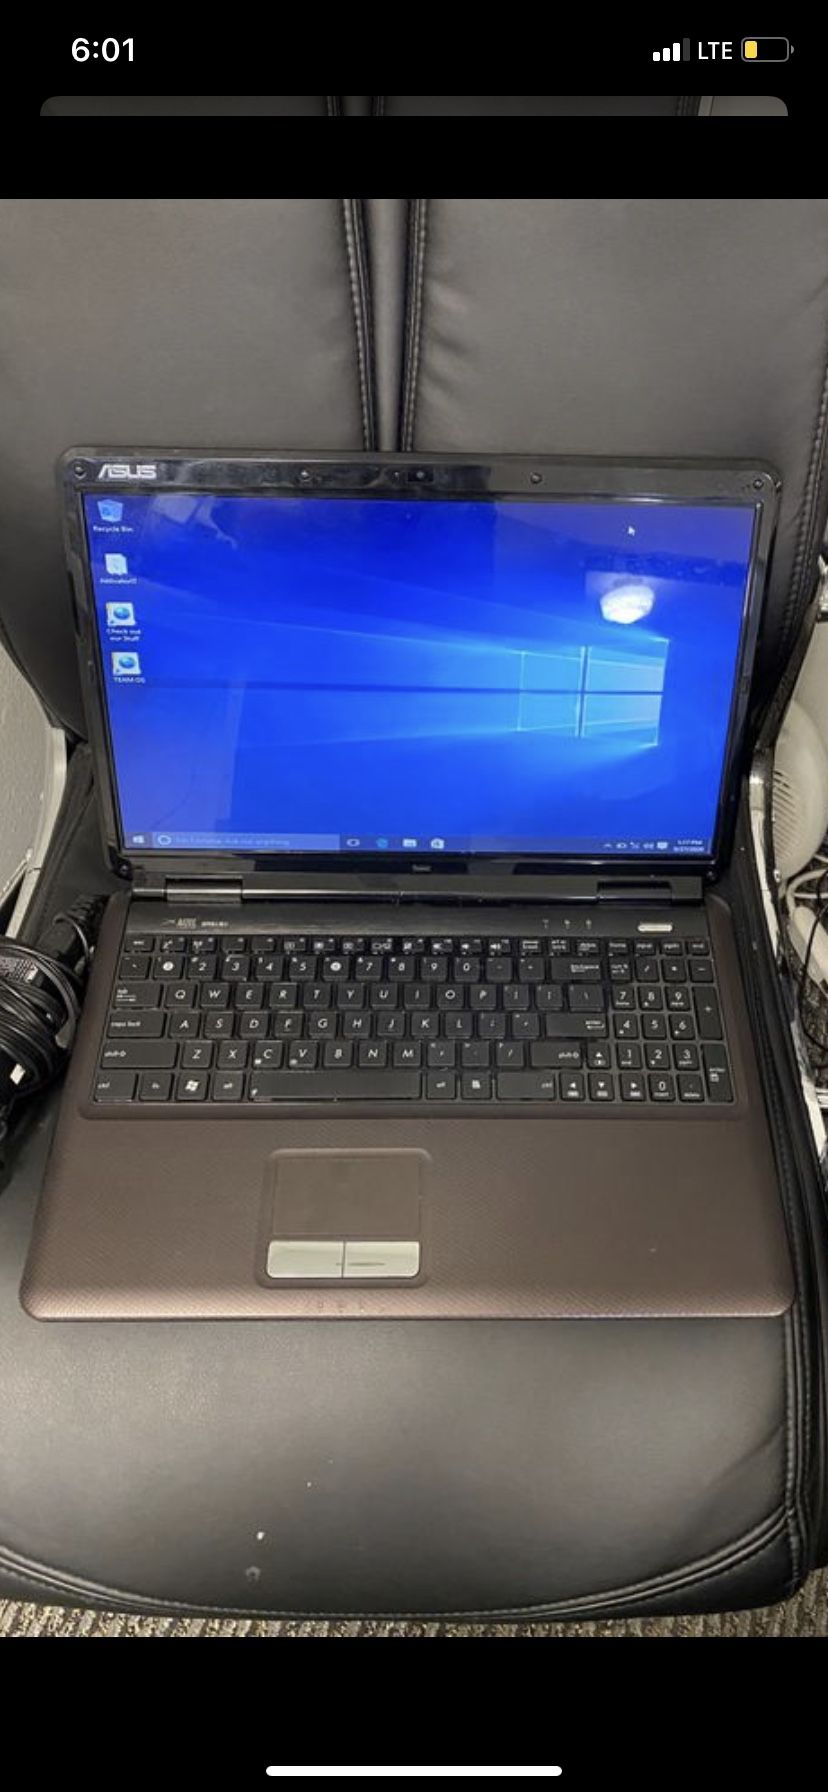 ASUS T4400, 2.2GHz, 4GB Ram, 320GB HDD, Win 10